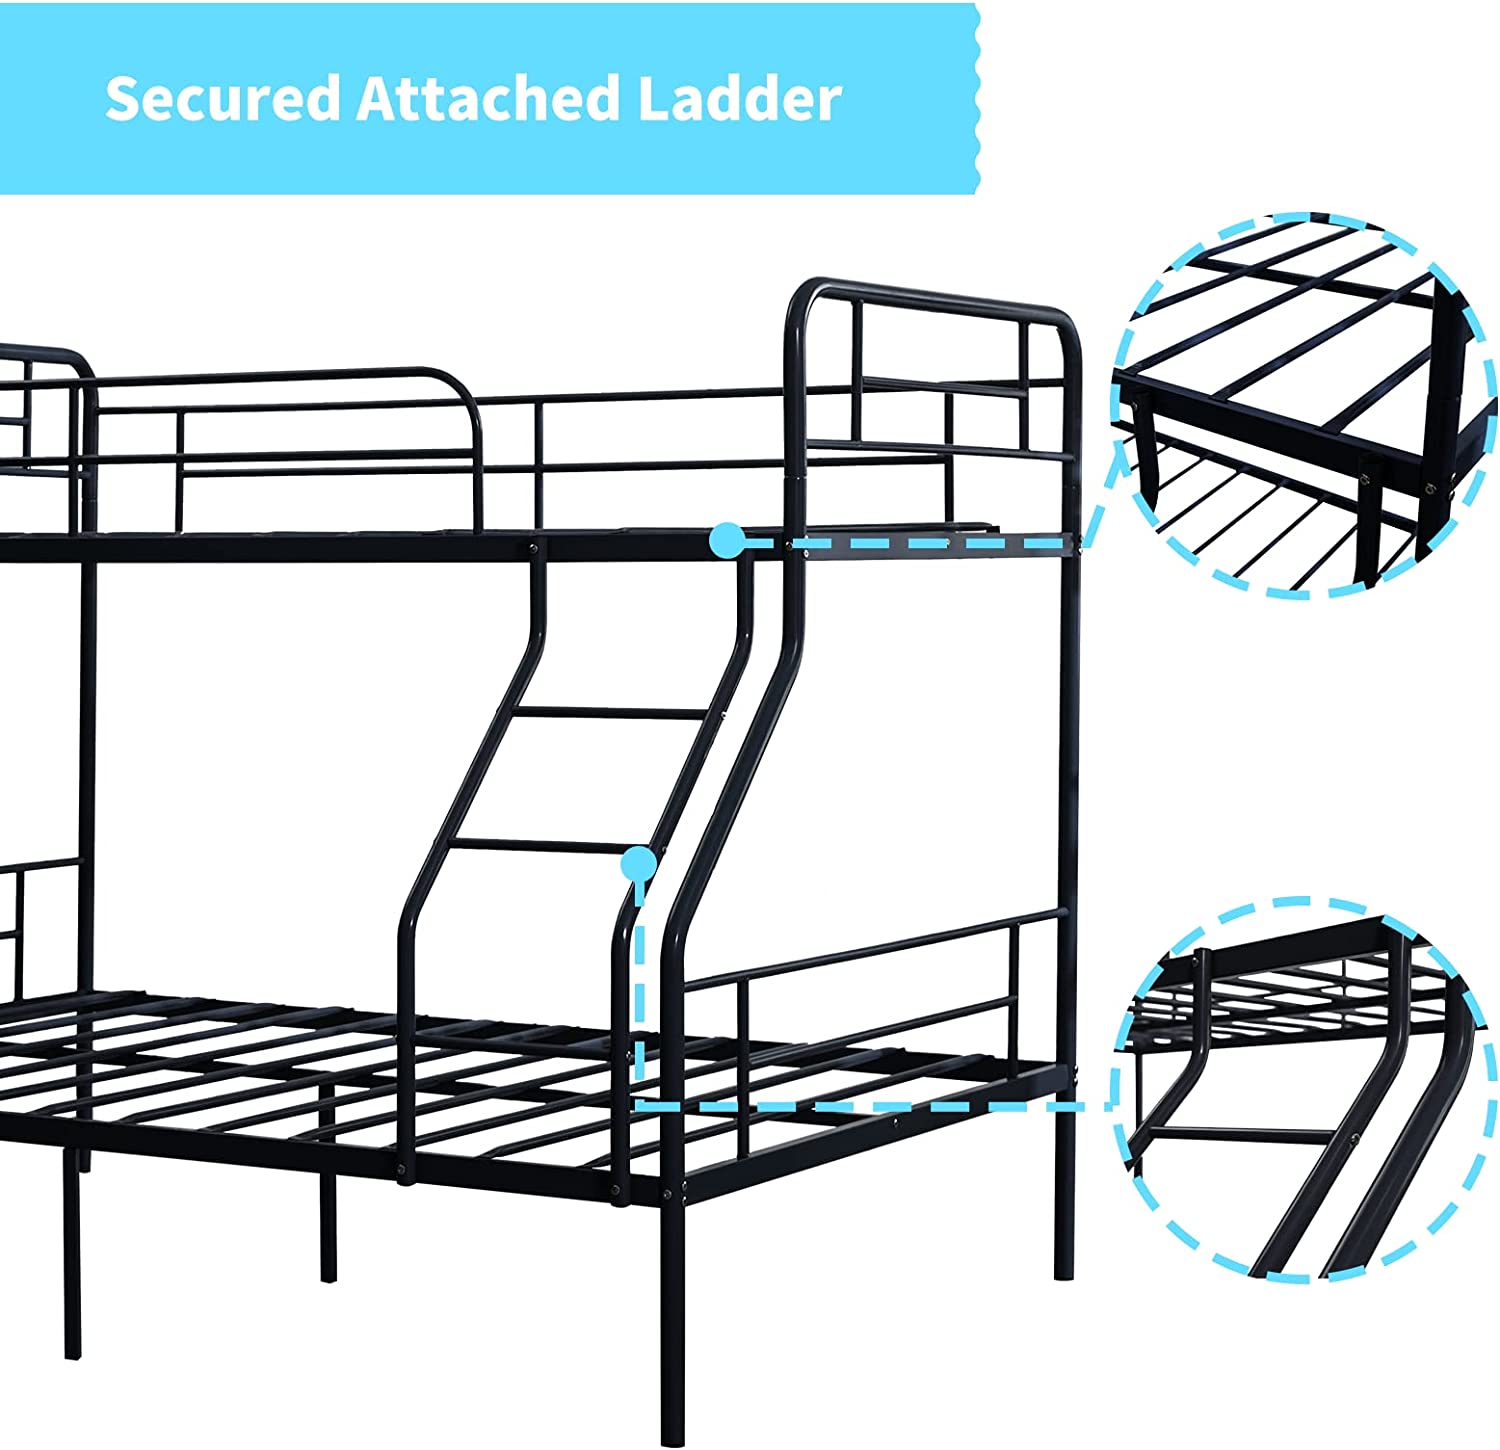 cuoote Heavy Duty Bunk Bed, Metal Twin Bunk Beds for Kids w/Ladder and Guardrail, Space-Saving Design, No Box Spring Needed, Black